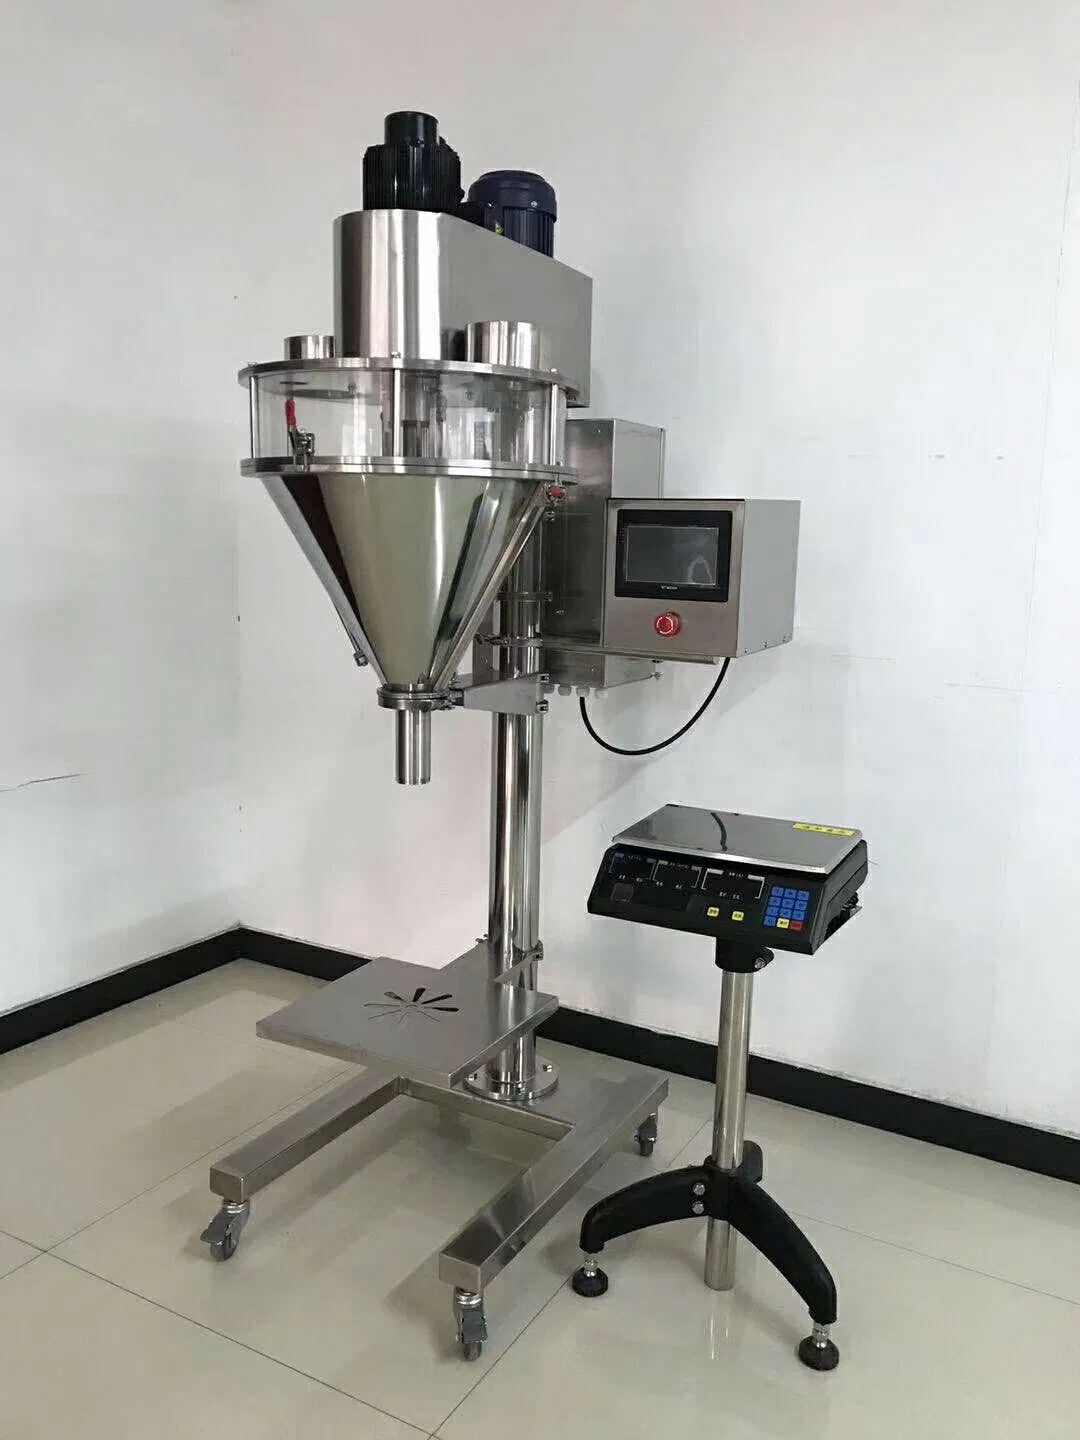 Complete System of Milk Powder Filling and Packaging Machine